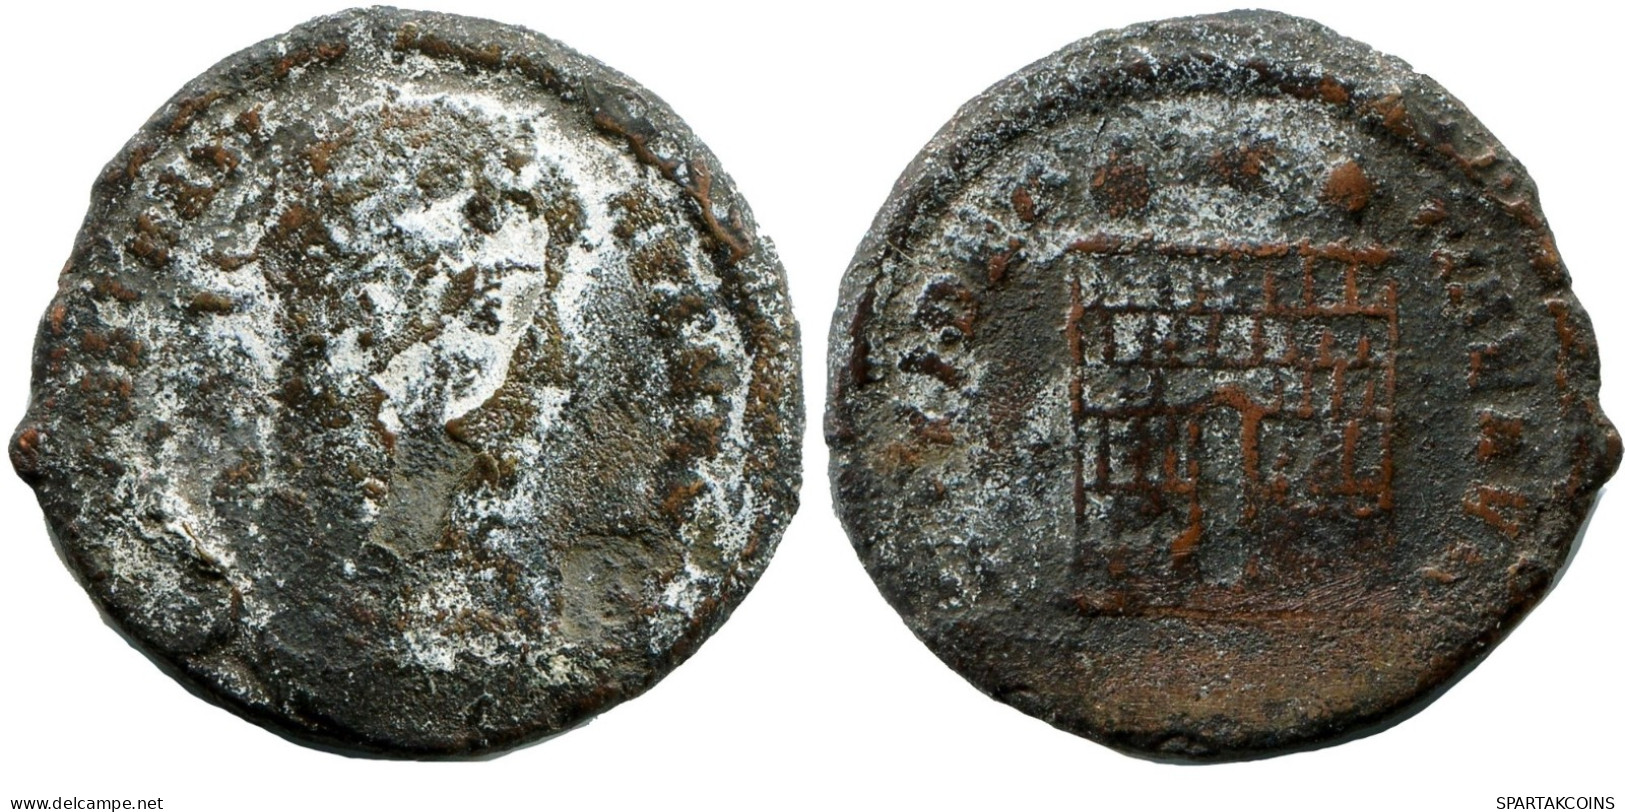 CONSTANTINE I MINTED IN CYZICUS FOUND IN IHNASYAH HOARD EGYPT #ANC10979.14.E.A - El Impero Christiano (307 / 363)